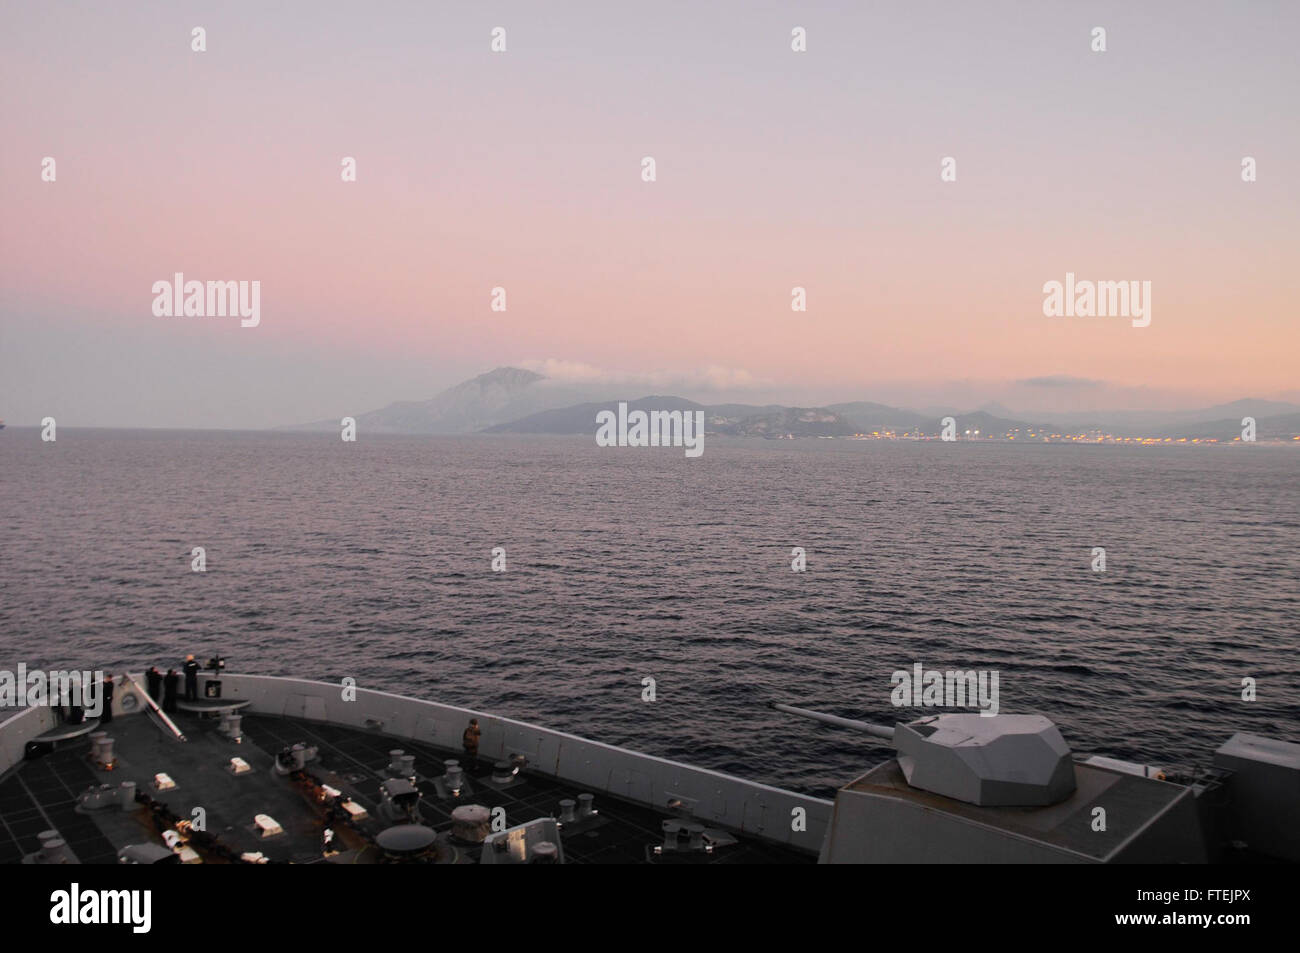 STRAIT OF GIBRALTAR (Dec. 25, 2014) The San Antonio-class amphibious transport dock ship USS New York (LPD 21) passes through the Strait of Gibraltar Dec. 25, 2014. New York, part of the Iwo Jima Amphibious Ready Group/24th Marine Expeditionary Unit, is conducting naval operations in the U.S. 6th Fleet area of operations in support of U.S. national security interests in Europe. Stock Photo